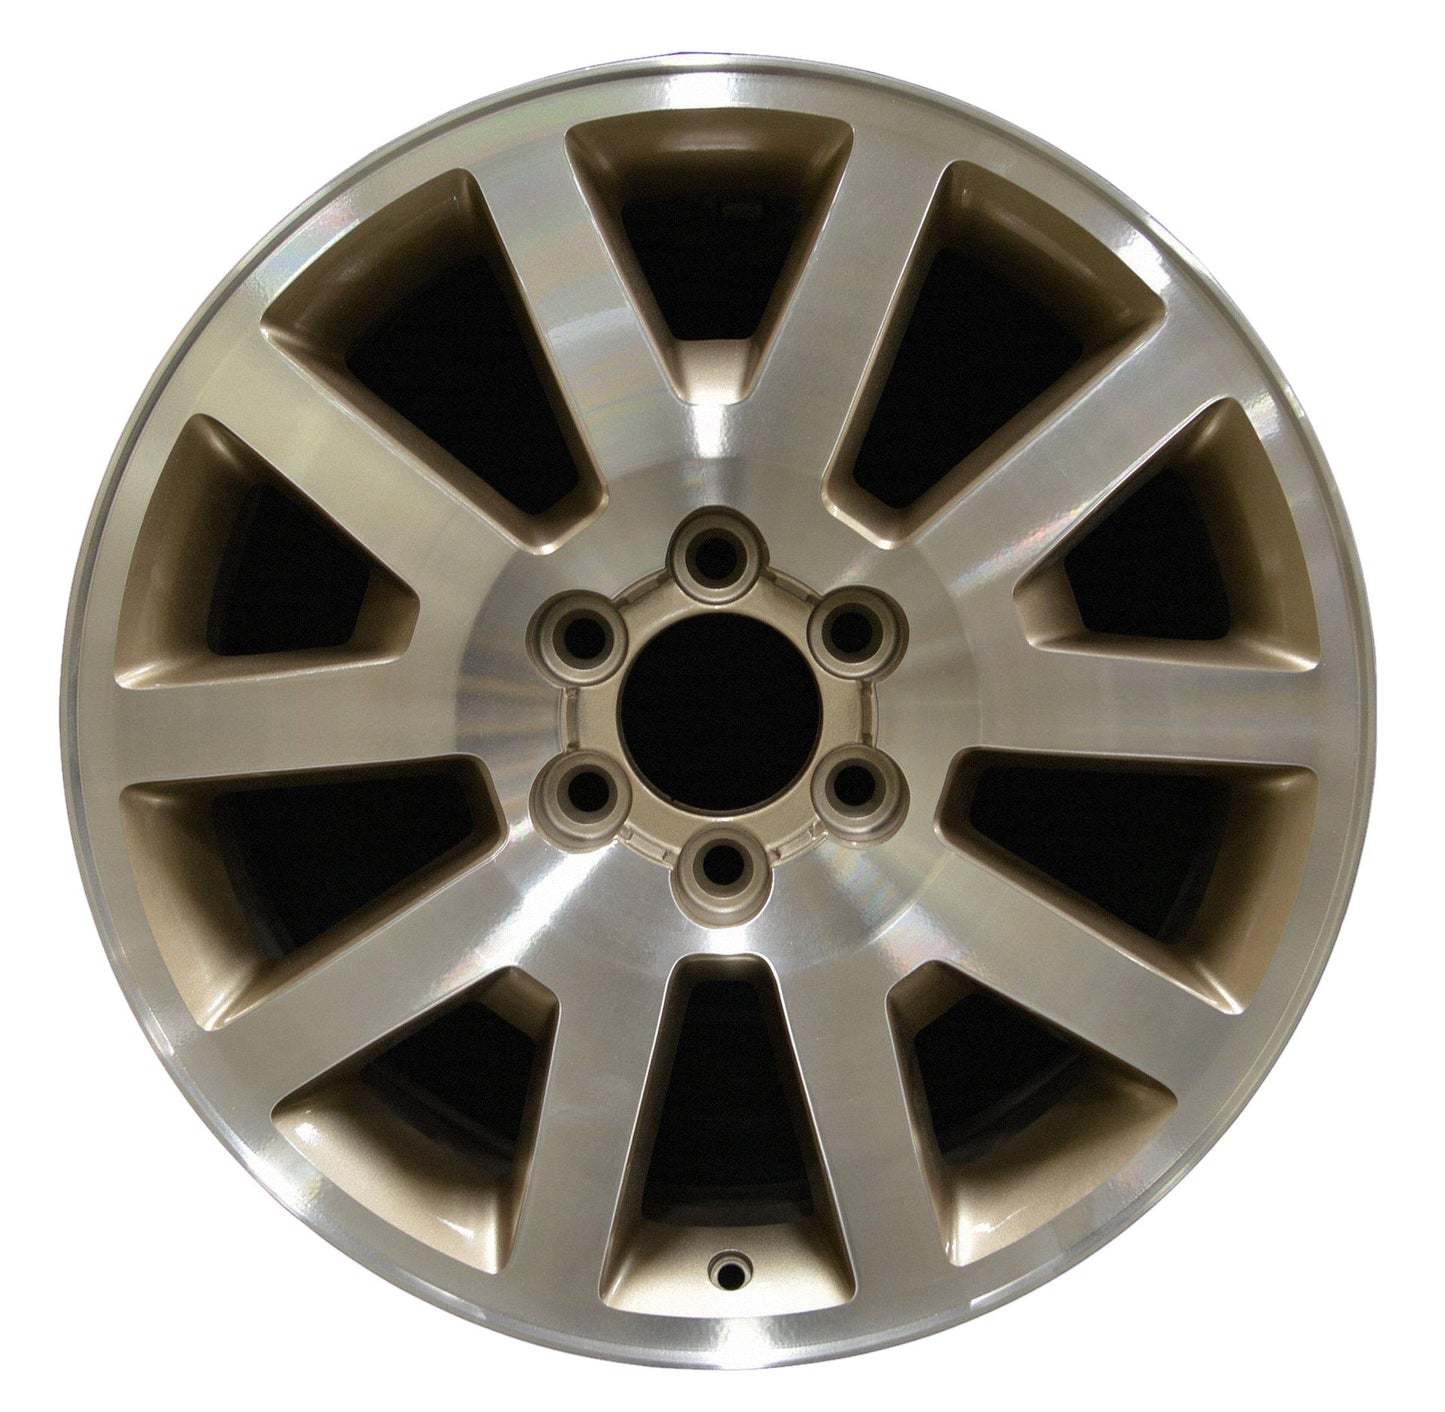 Ford Expedition  2011, 2012, 2013, 2014 Factory OEM Car Wheel Size 20x8.5 Alloy WAO.3789.LG04.MA